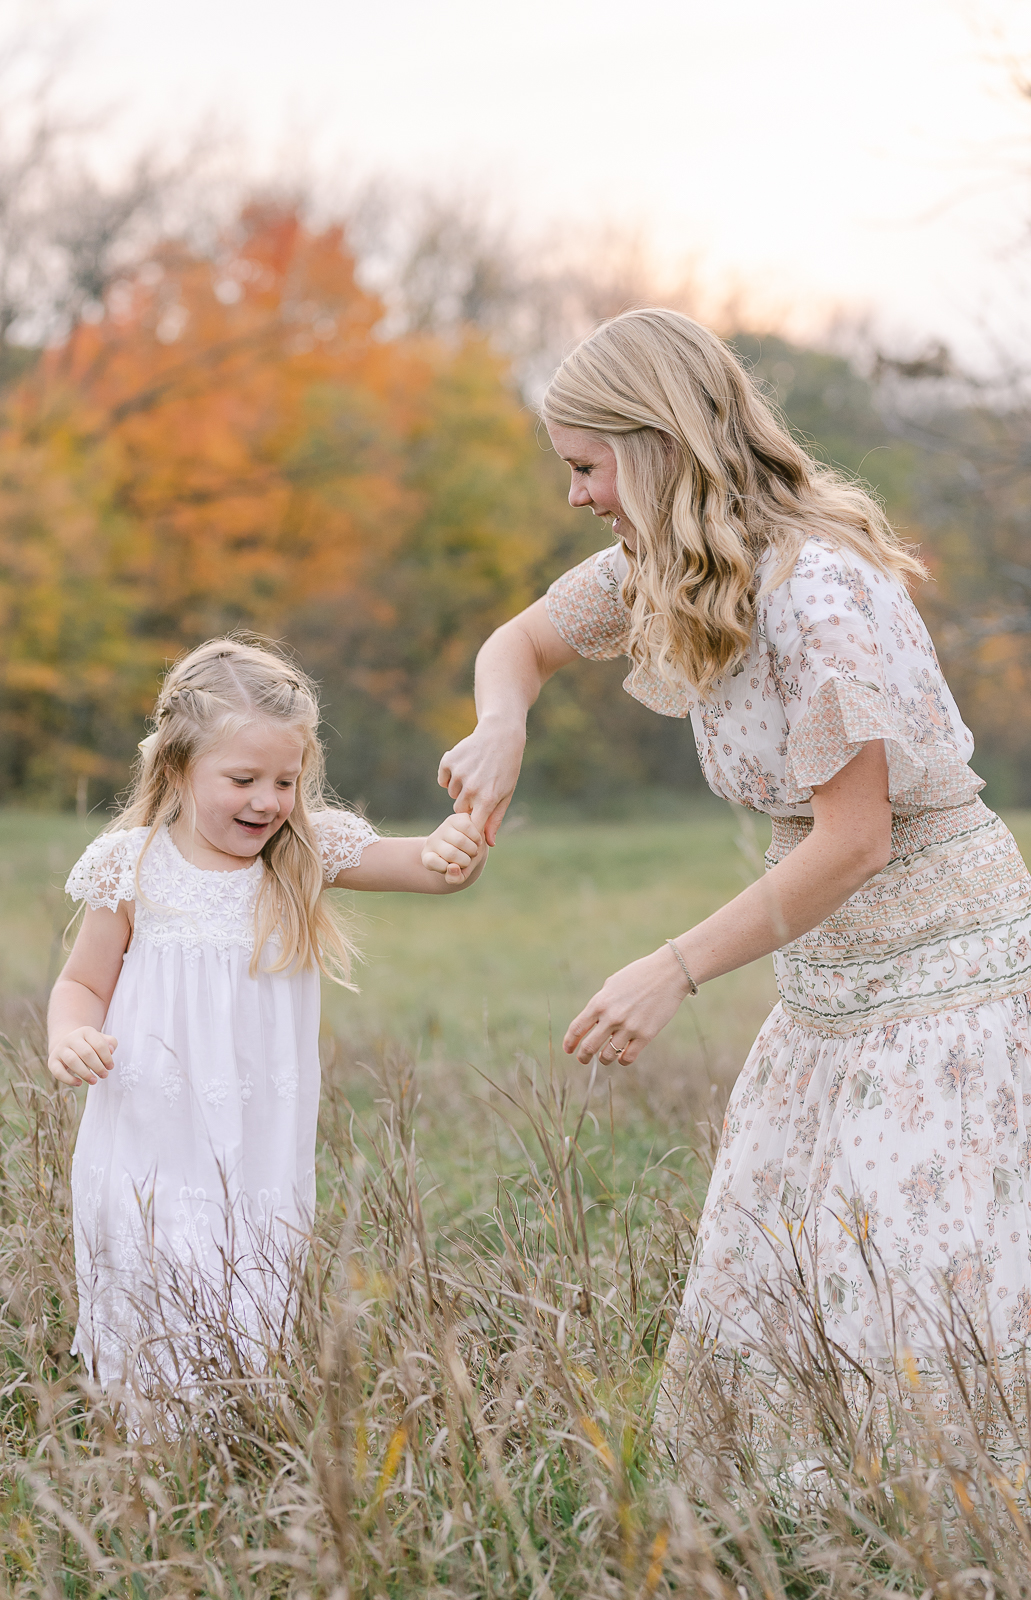 Plymouth, Michigan photography, Laurel Smith Photography captures this playful mother and daughter twirl in a tall grass field. little girl twirling, mom and daughter dancing in field, professional plymouth michigan family photographer, falll michigan family photos, laurel smith photography, white little girl dress, white and ivory floral womens dress #DetroitMichiganFamilyPhotographer #DetroitMichiganPhotographer #FamilyPhotoOutfitInspiration #PlymouthMichiganFamilyPhotographer #PlymouthMichiganPhotographer #ExtendedFamilyPhotos #DetroitMichiganFallFamilyPhotos #LetThemBeLittle #LetTheKids #DetroitMichiganLifestylePhotographer